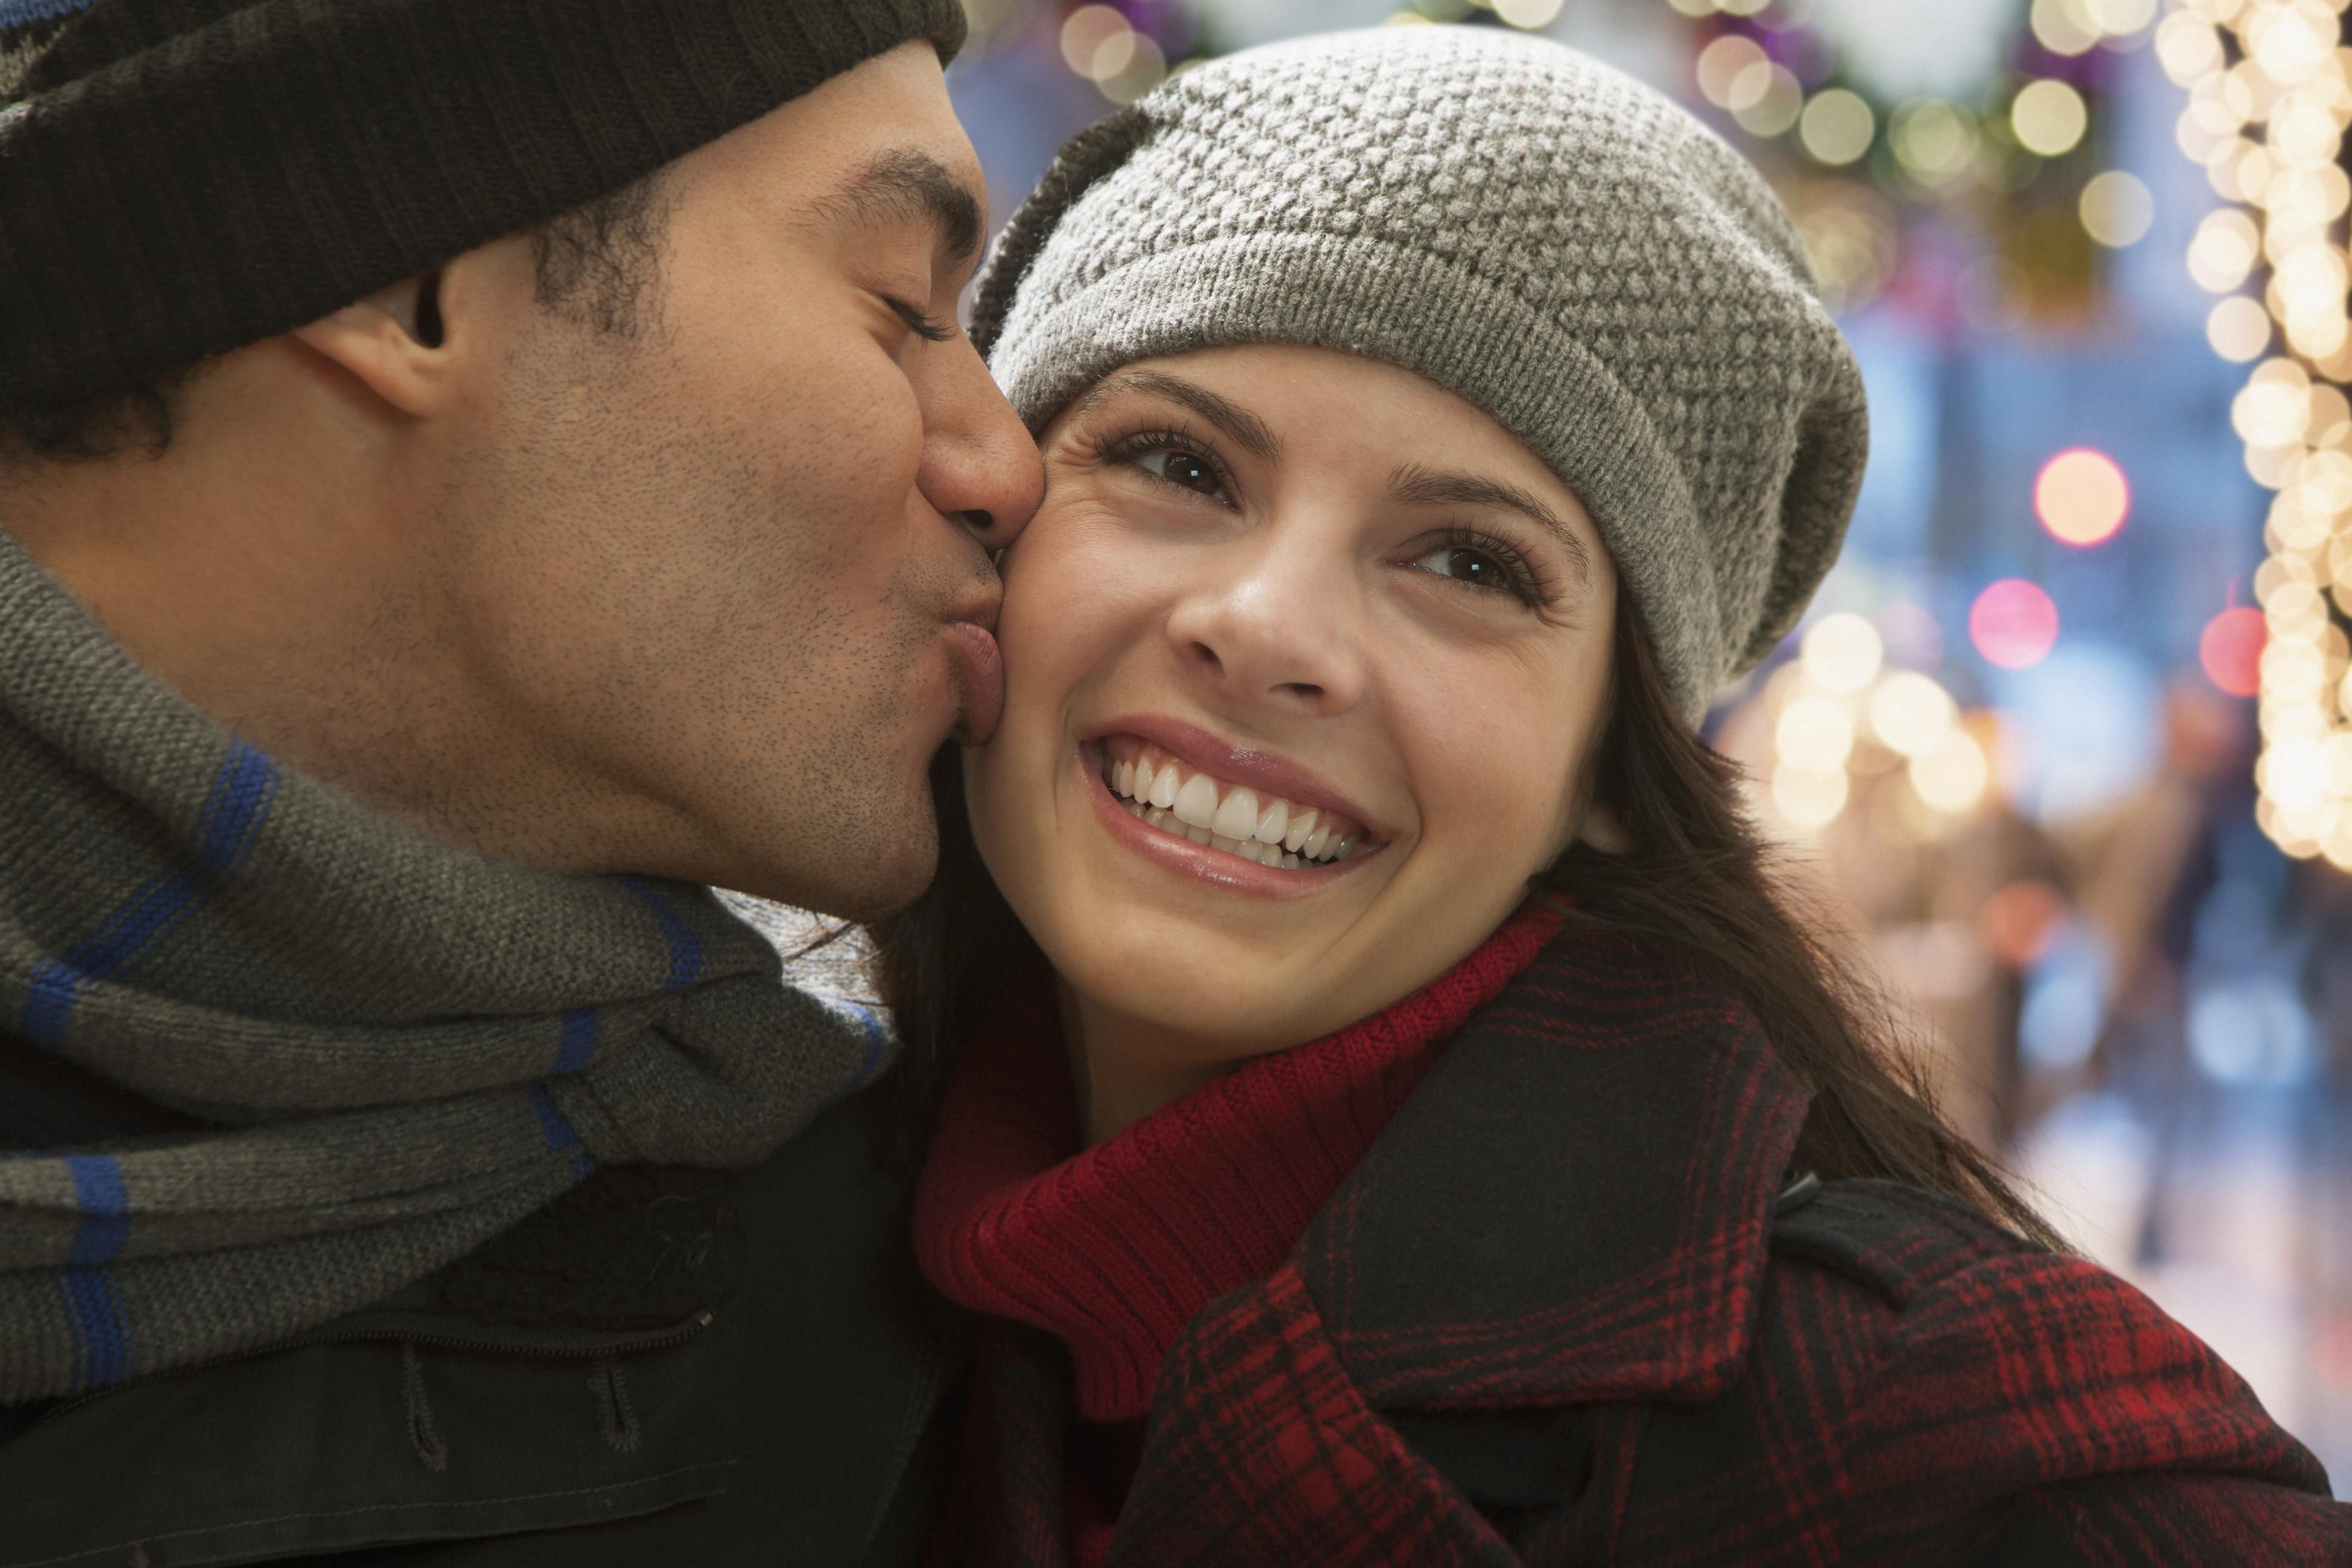 How to Know the Right Time for a First Kiss